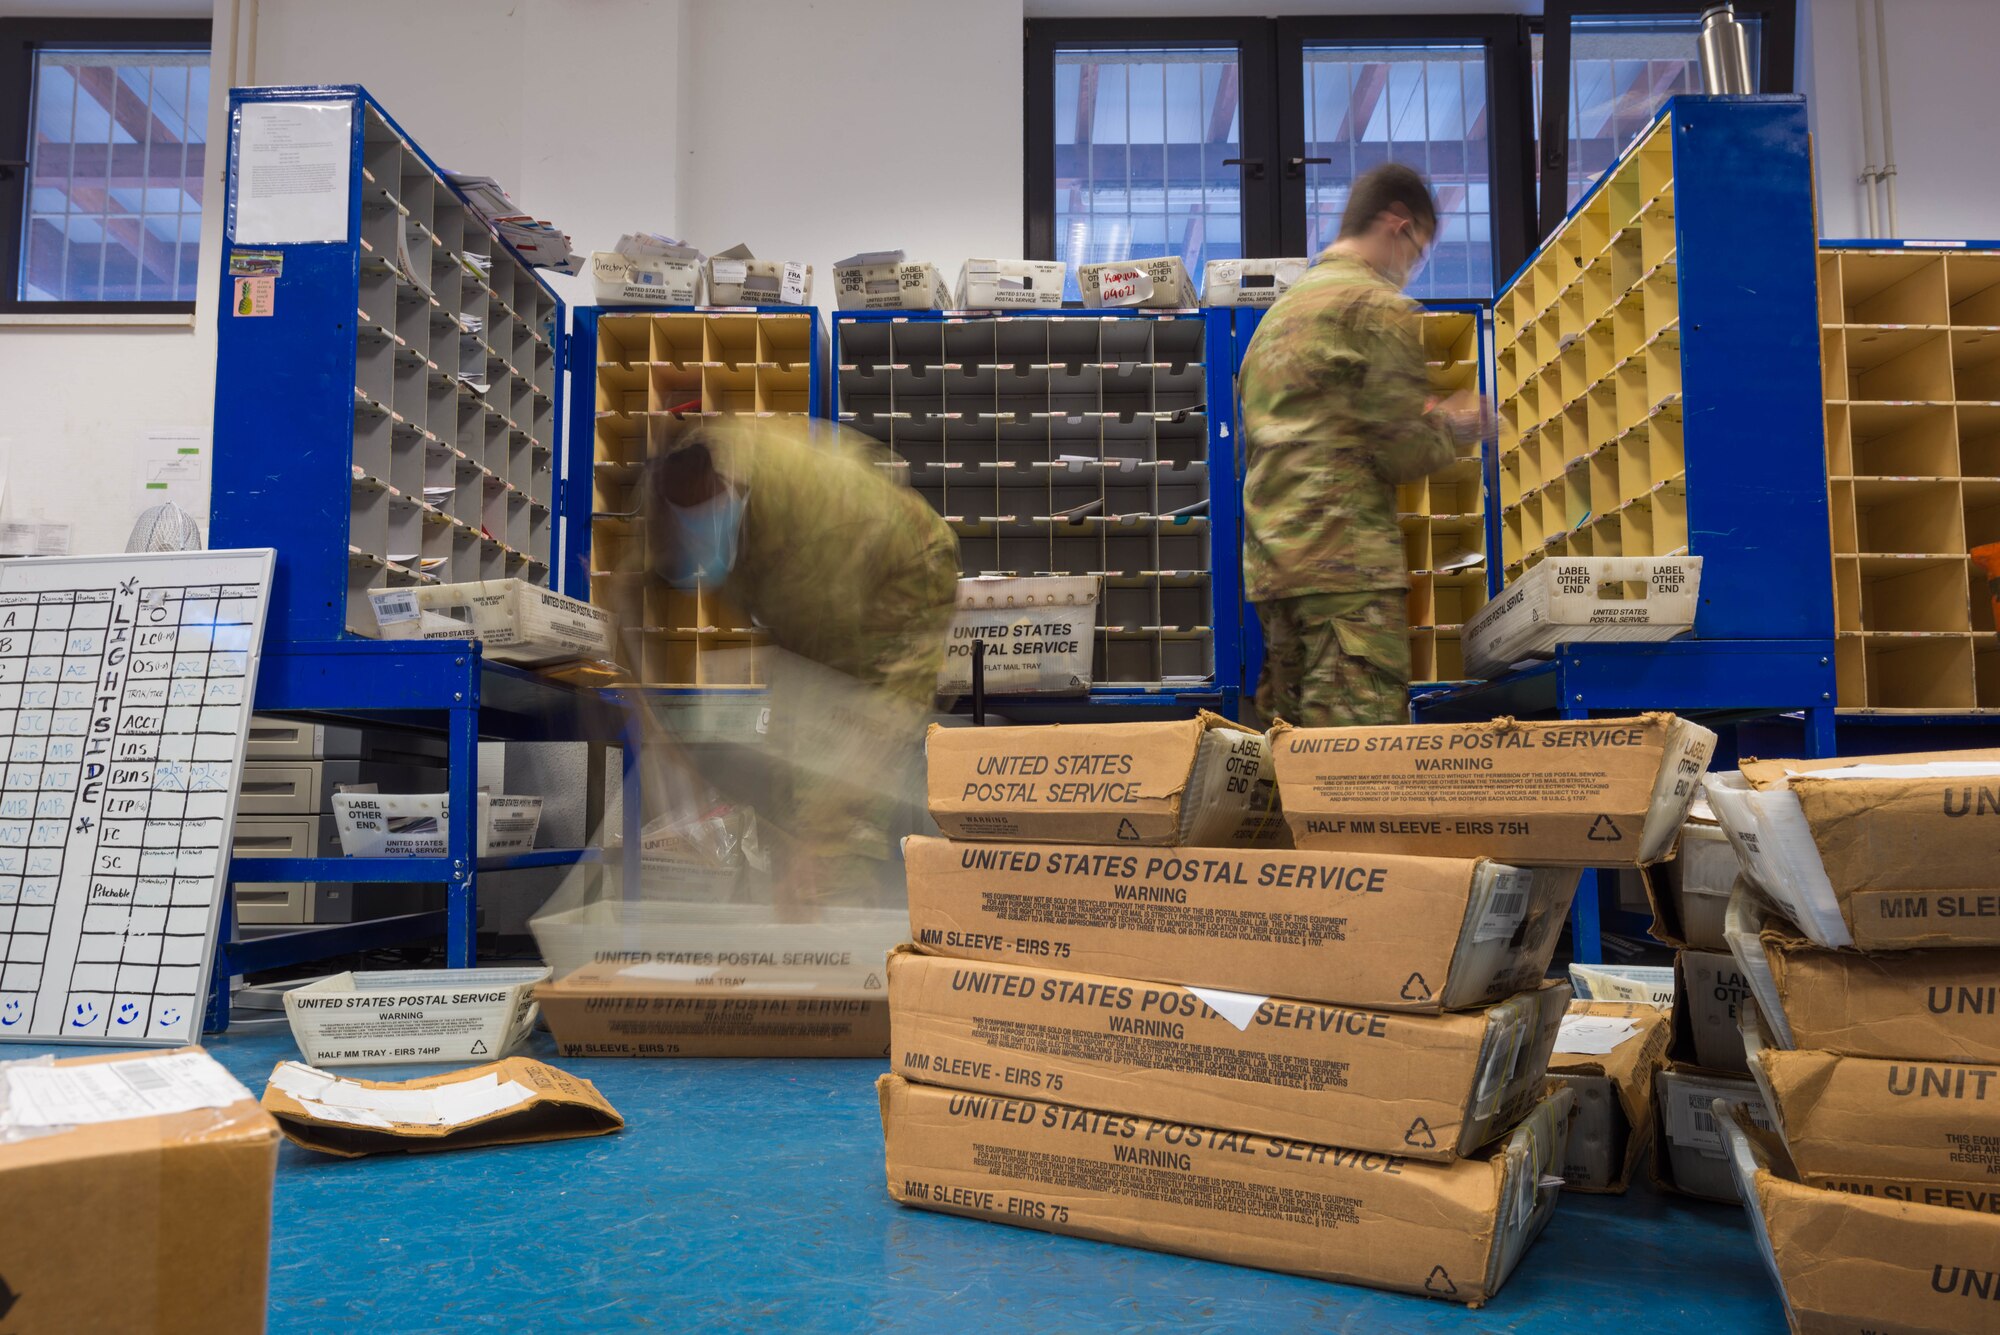 Two Airman sort through mail in the Northside Post Office at Ramstein Air Base.